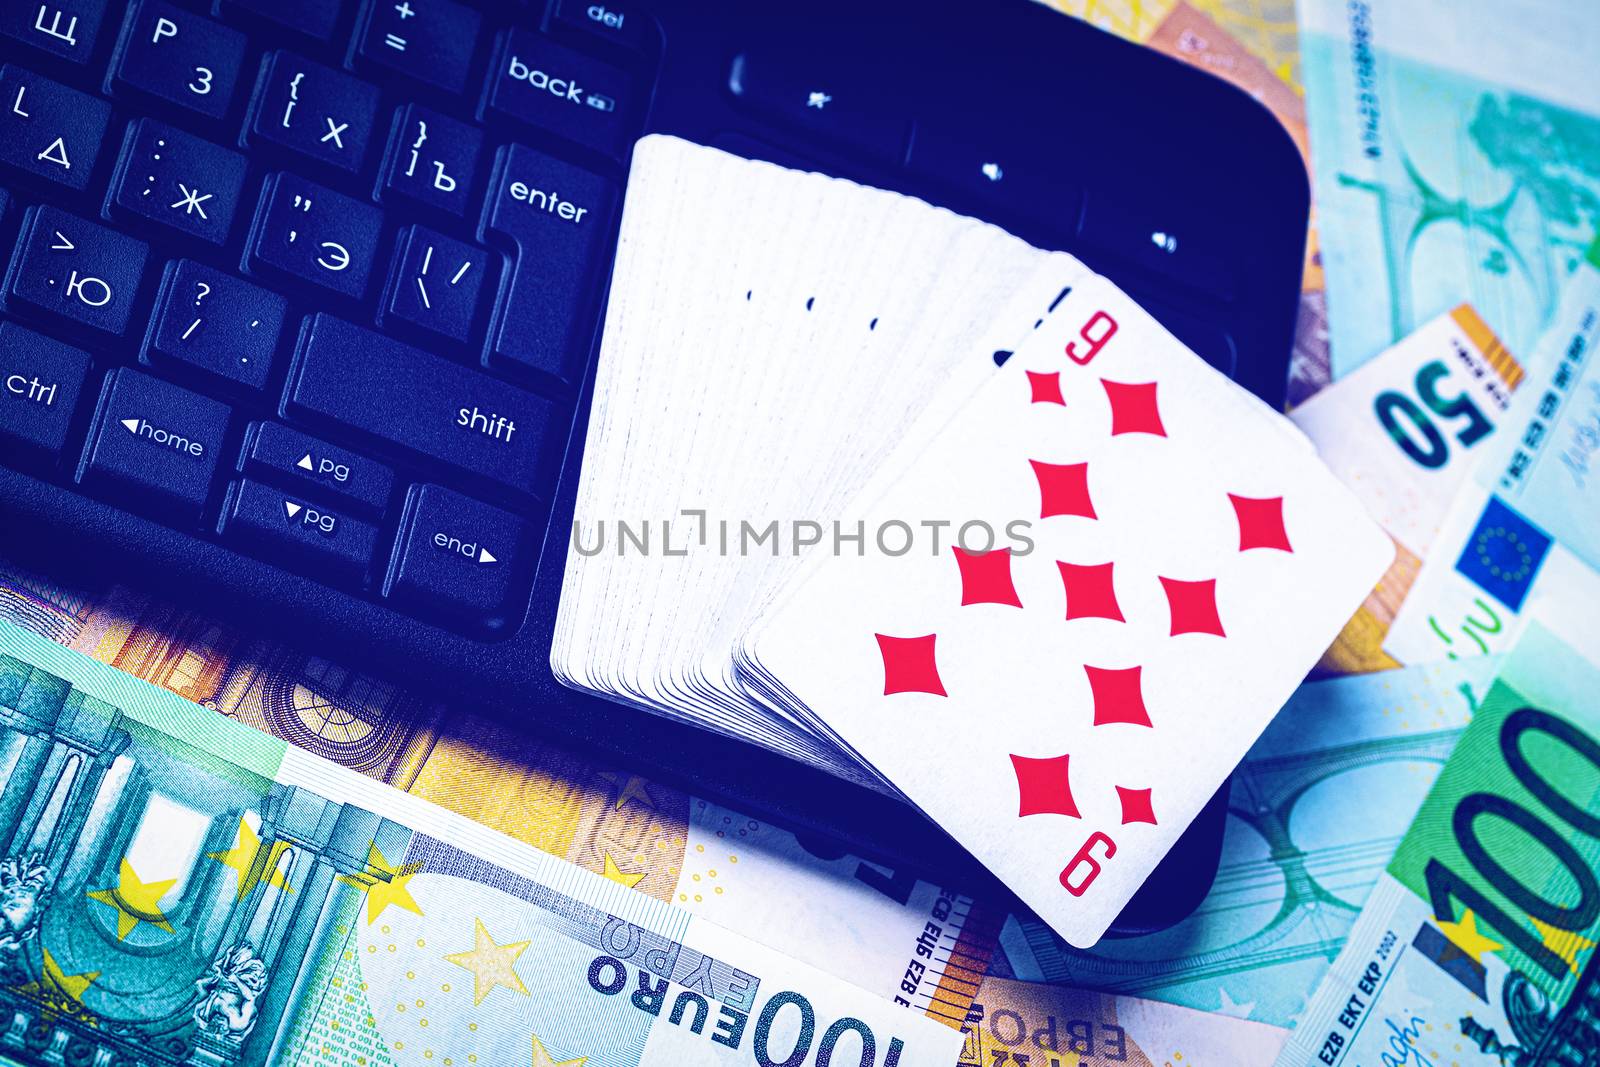 Euro bills, a deck of playing cards and a black keyboard. Concep by Eugene_Yemelyanov